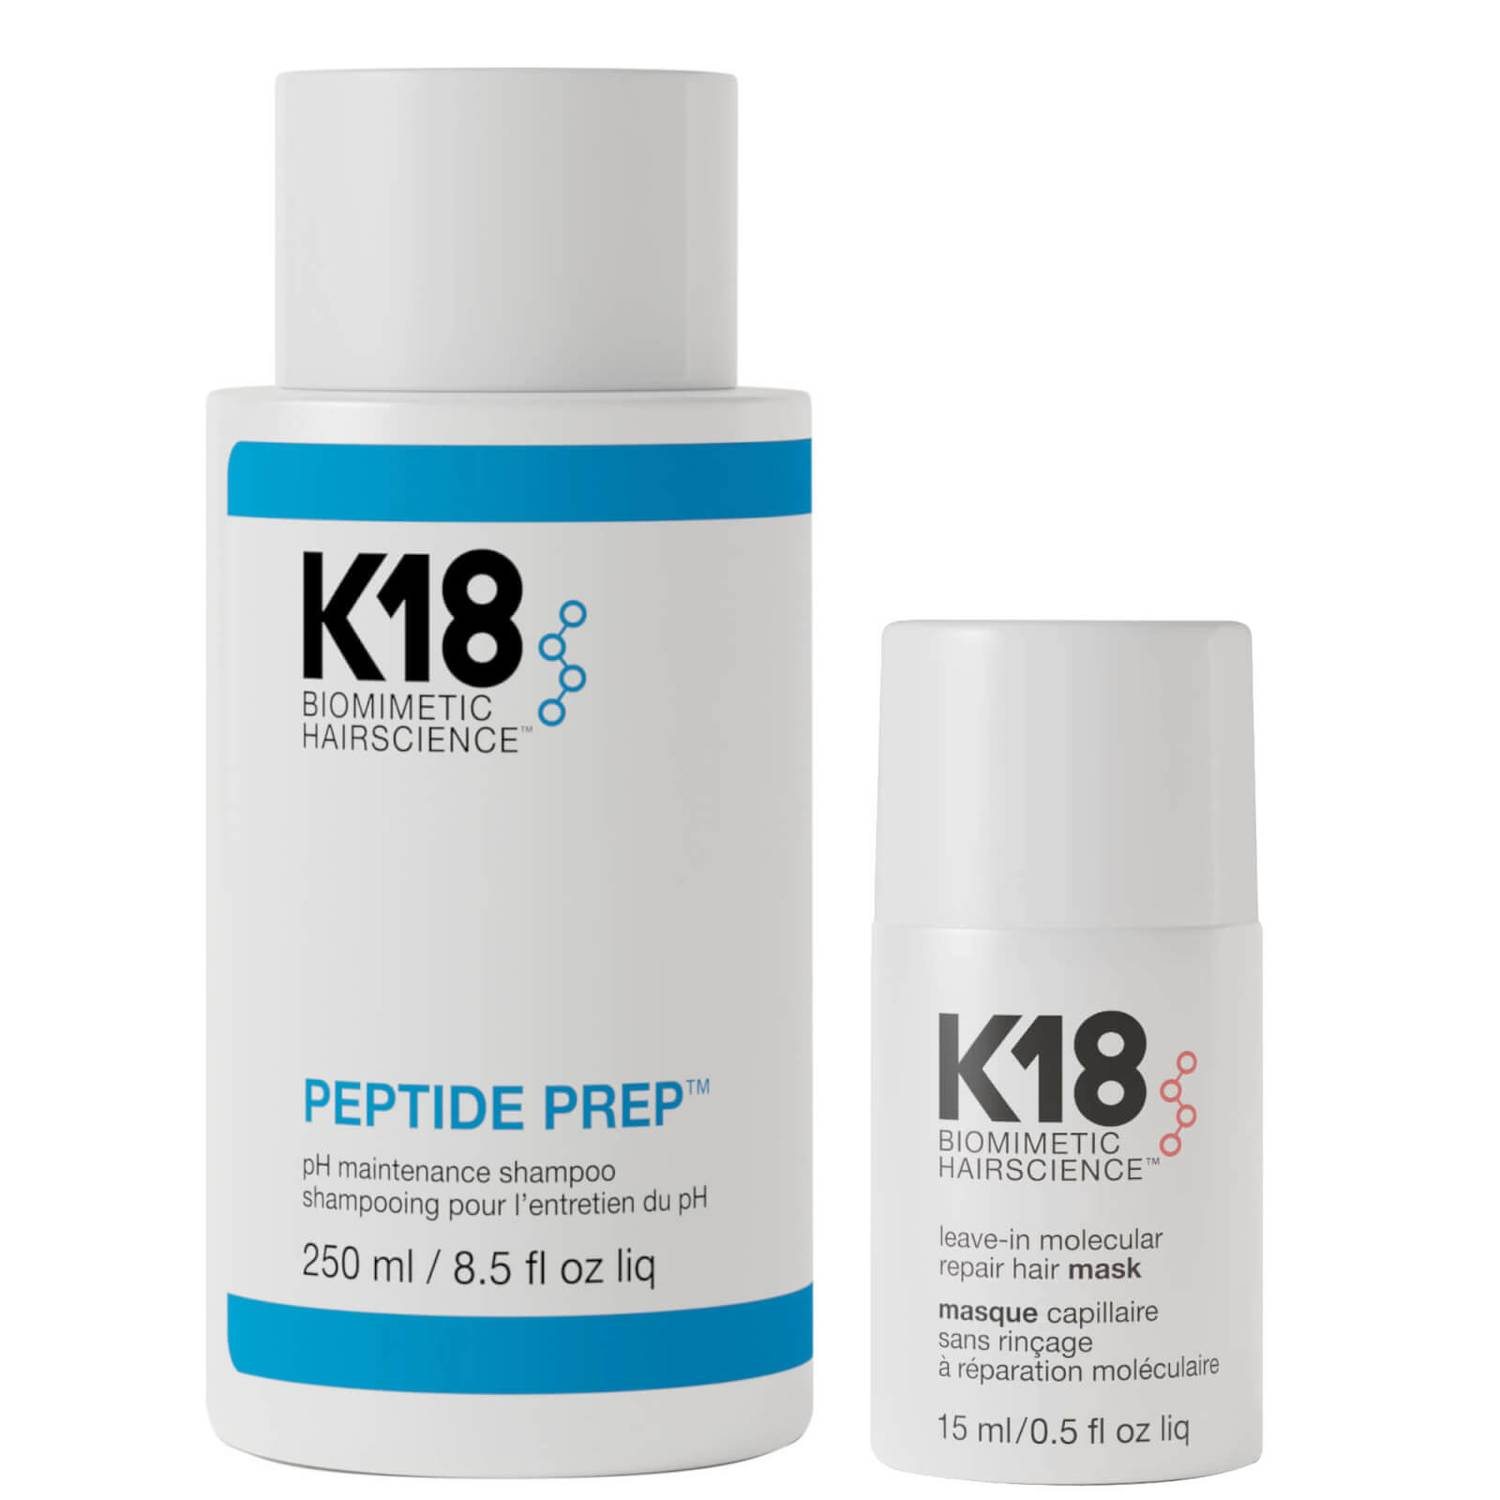 Peptide Prep Shampoo and Hair Mask Duo